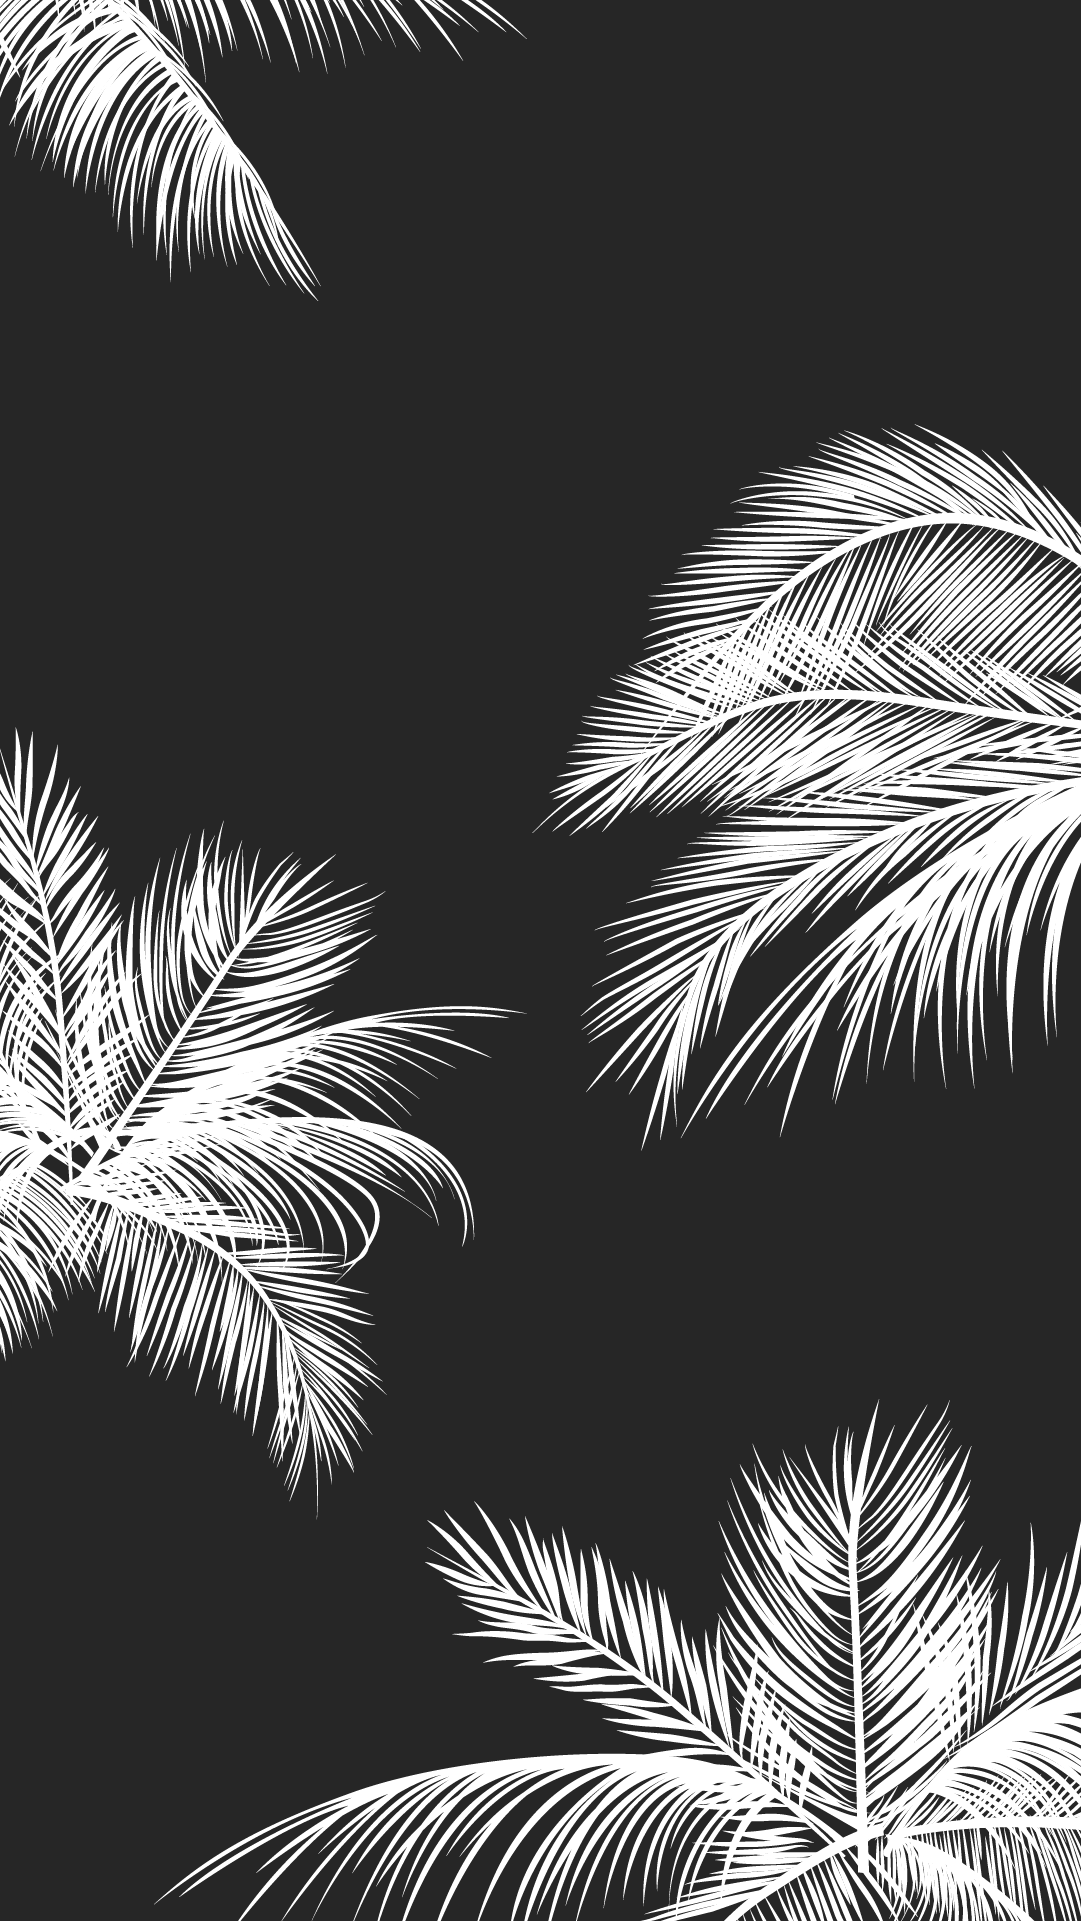 Cool Black and White Wallpapers - Top